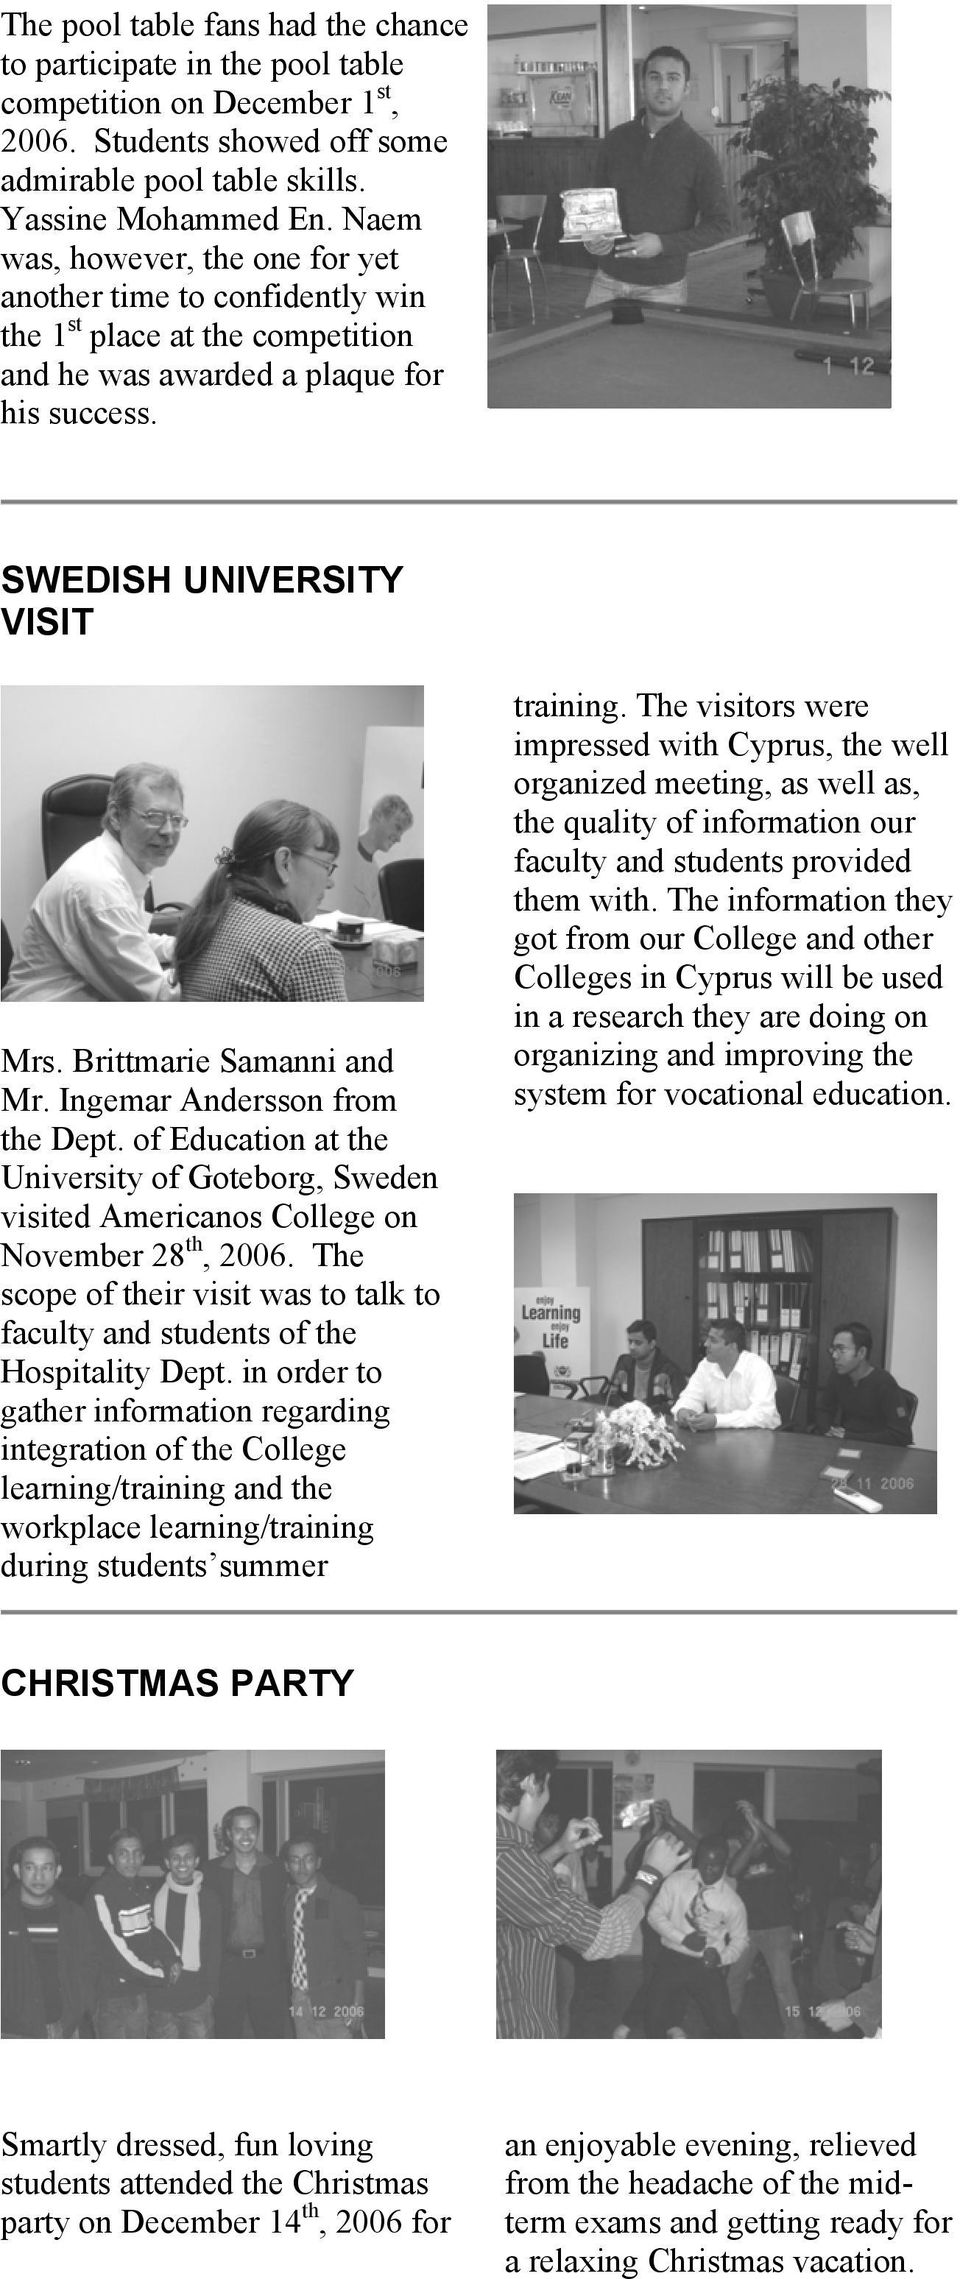 Brittmarie Samanni and Mr. Ingemar Andersson from the Dept. of Education at the University of Goteborg, Sweden visited Americanos College on November 28 th, 2006.